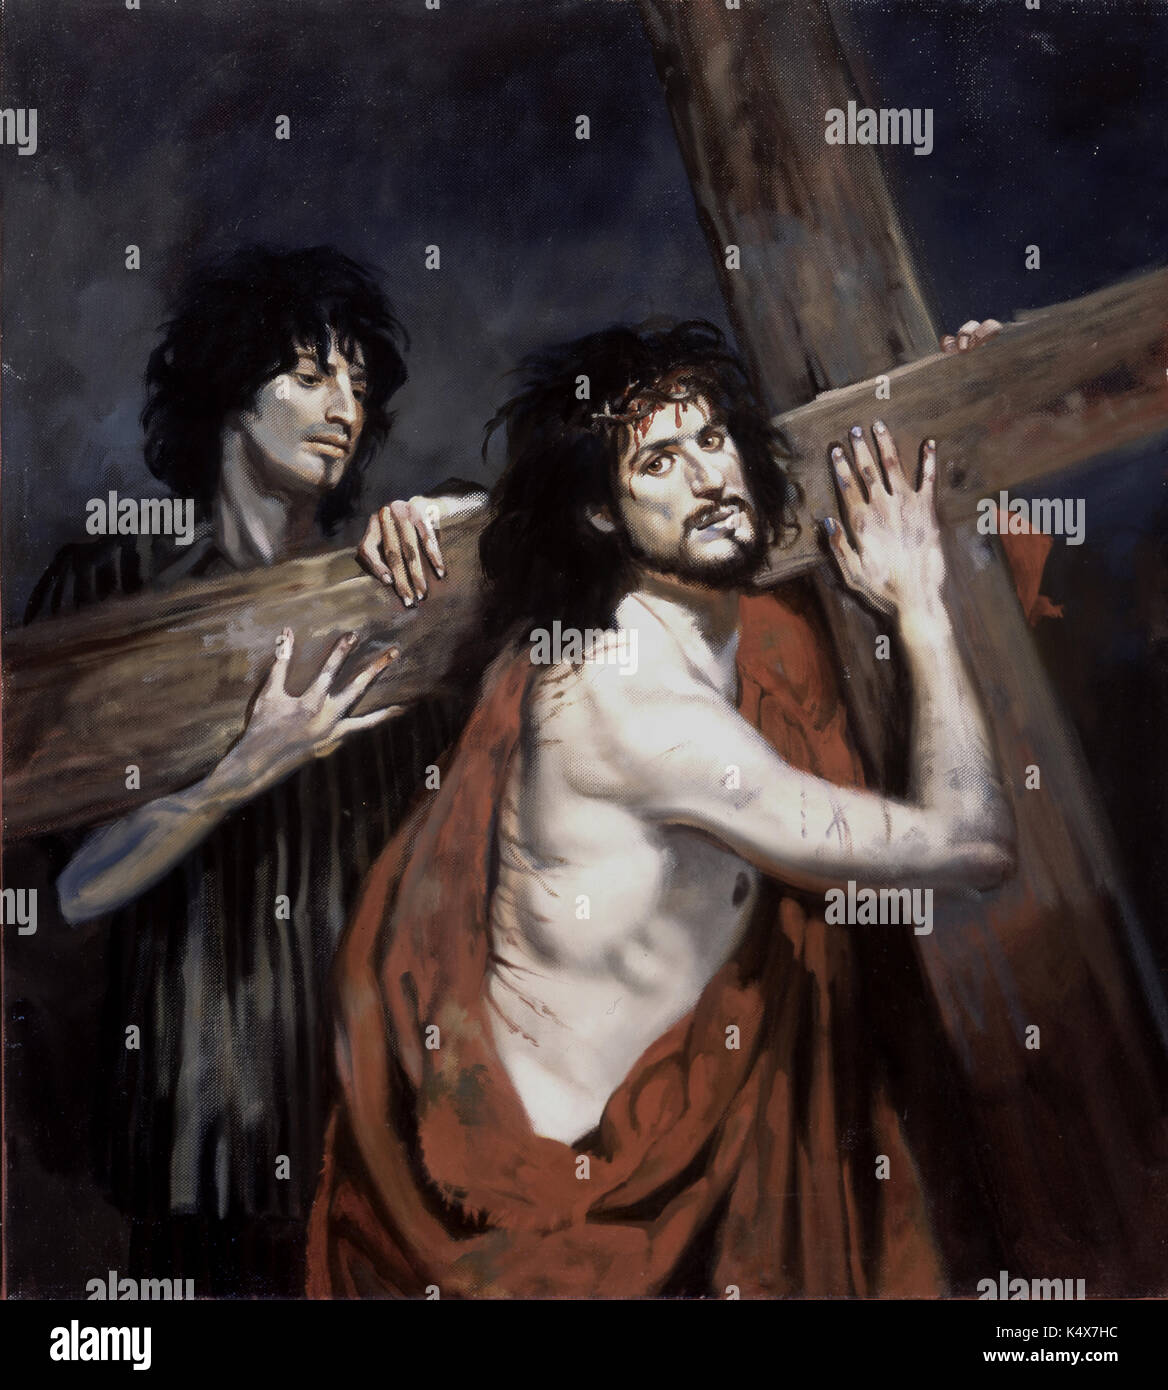 Christ and Simon of Cyrene at Auschwitz-Jesus caries His cross helped by Simon of Cyrene, in a striped uniform (now known as striped pyjamas). Stock Photo